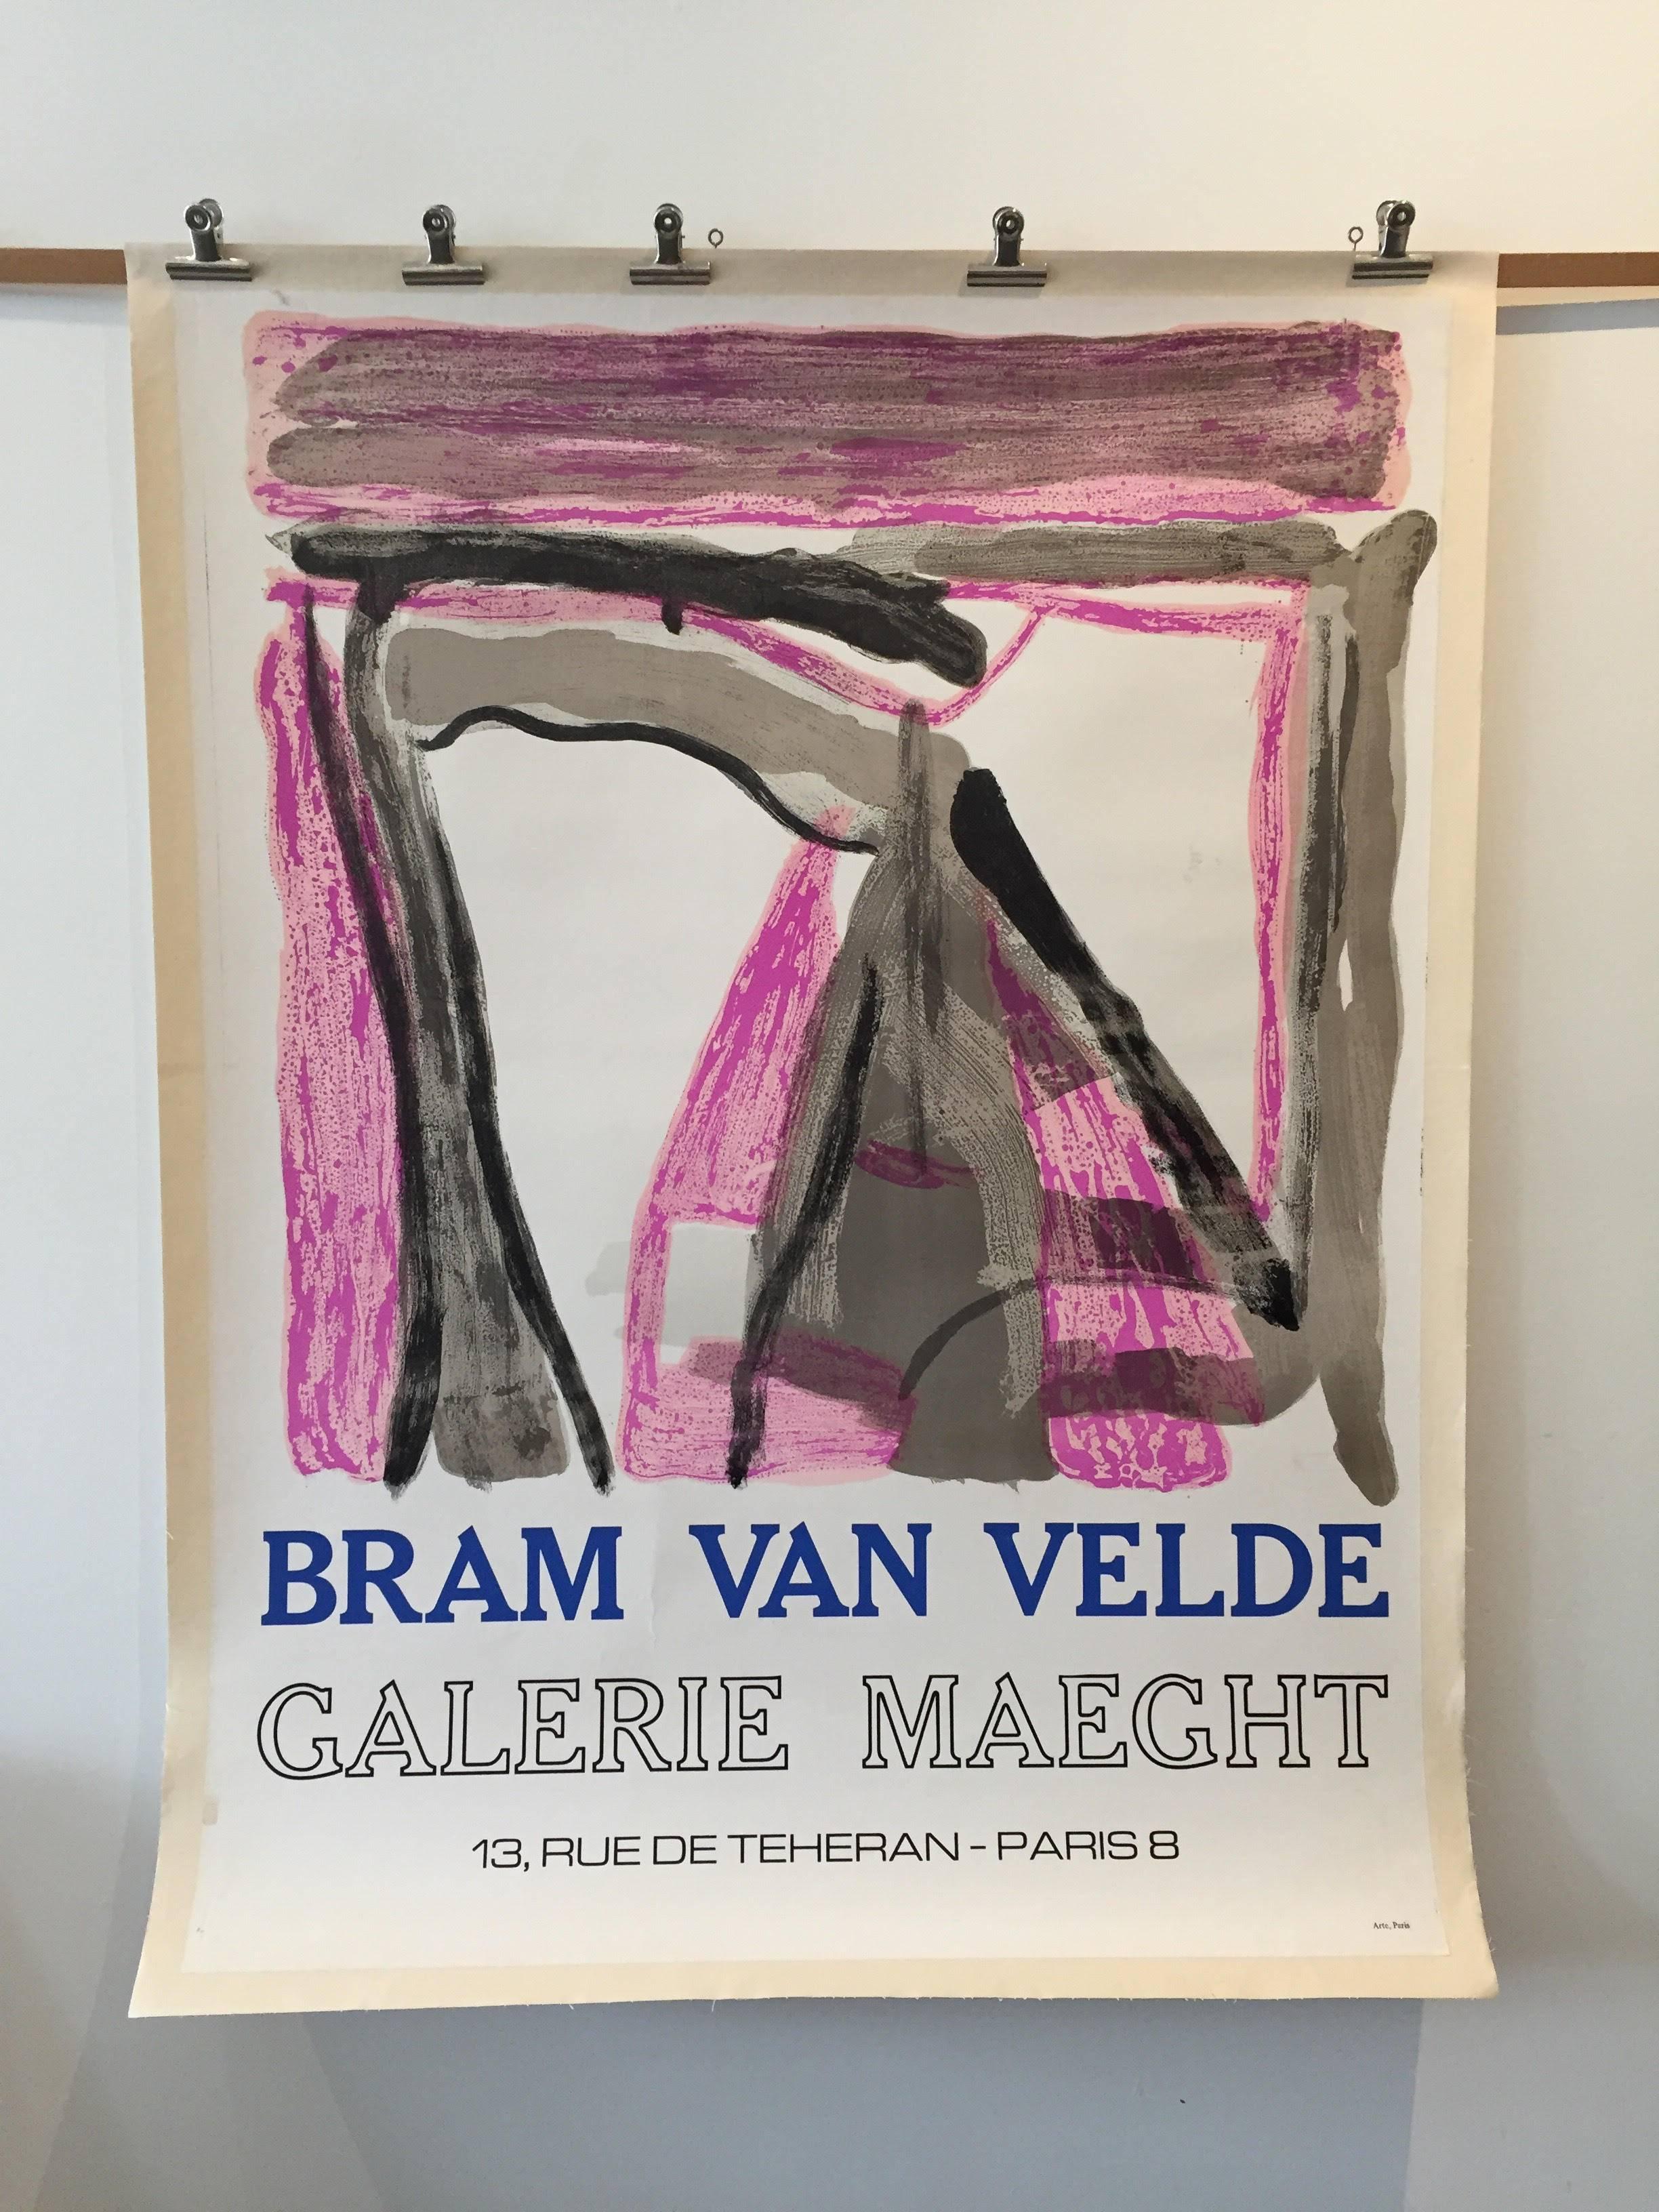 This is a rare and unique poster for the famous French Parisian gallery ‘Galerie Maeght’, featuring artist Bram Van Velde.



Artist: 
Bram Van Velde

Year